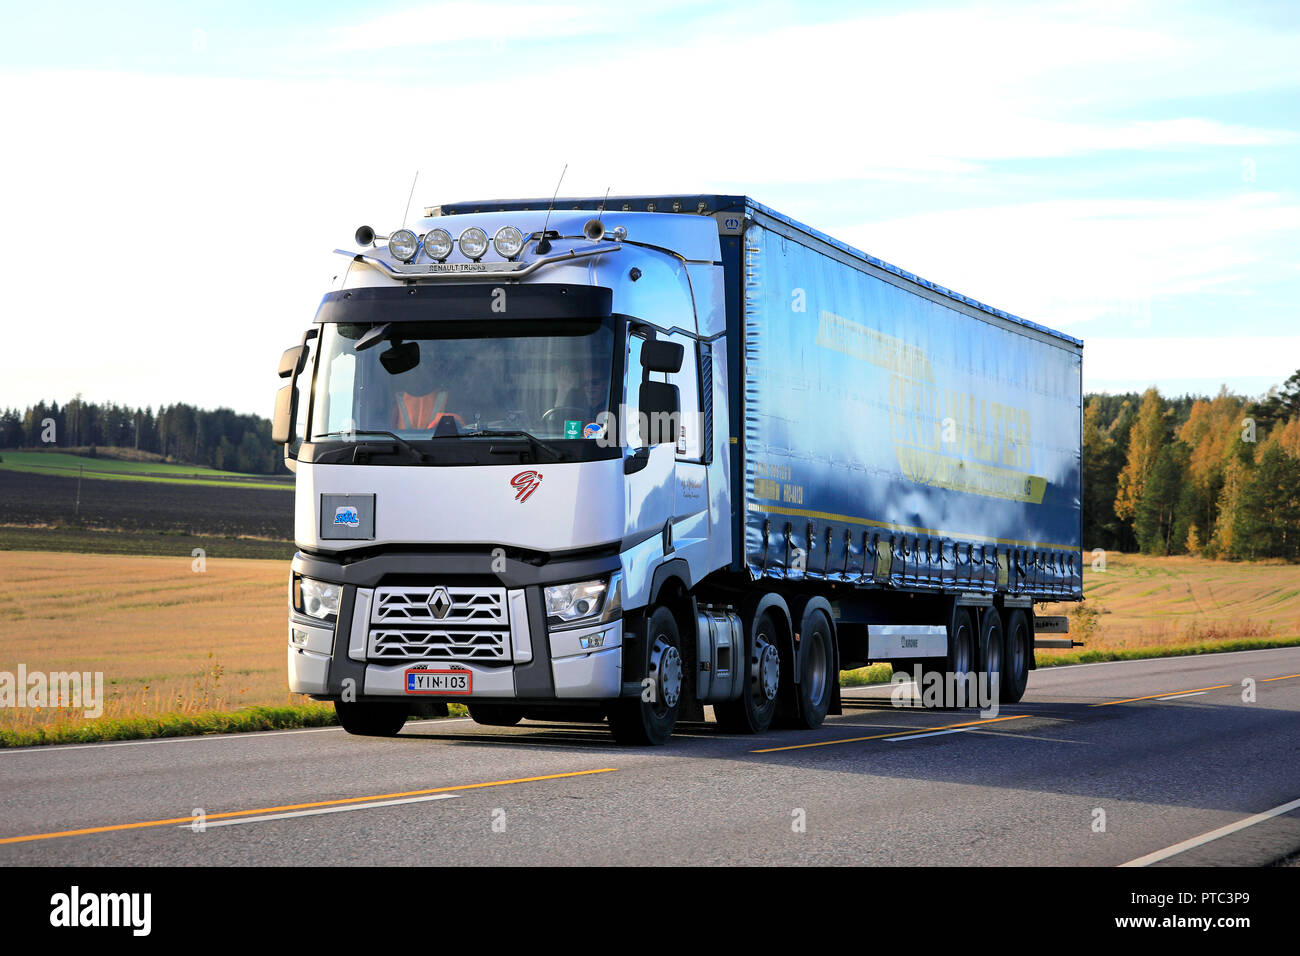 01 Customized by Renault Trucks